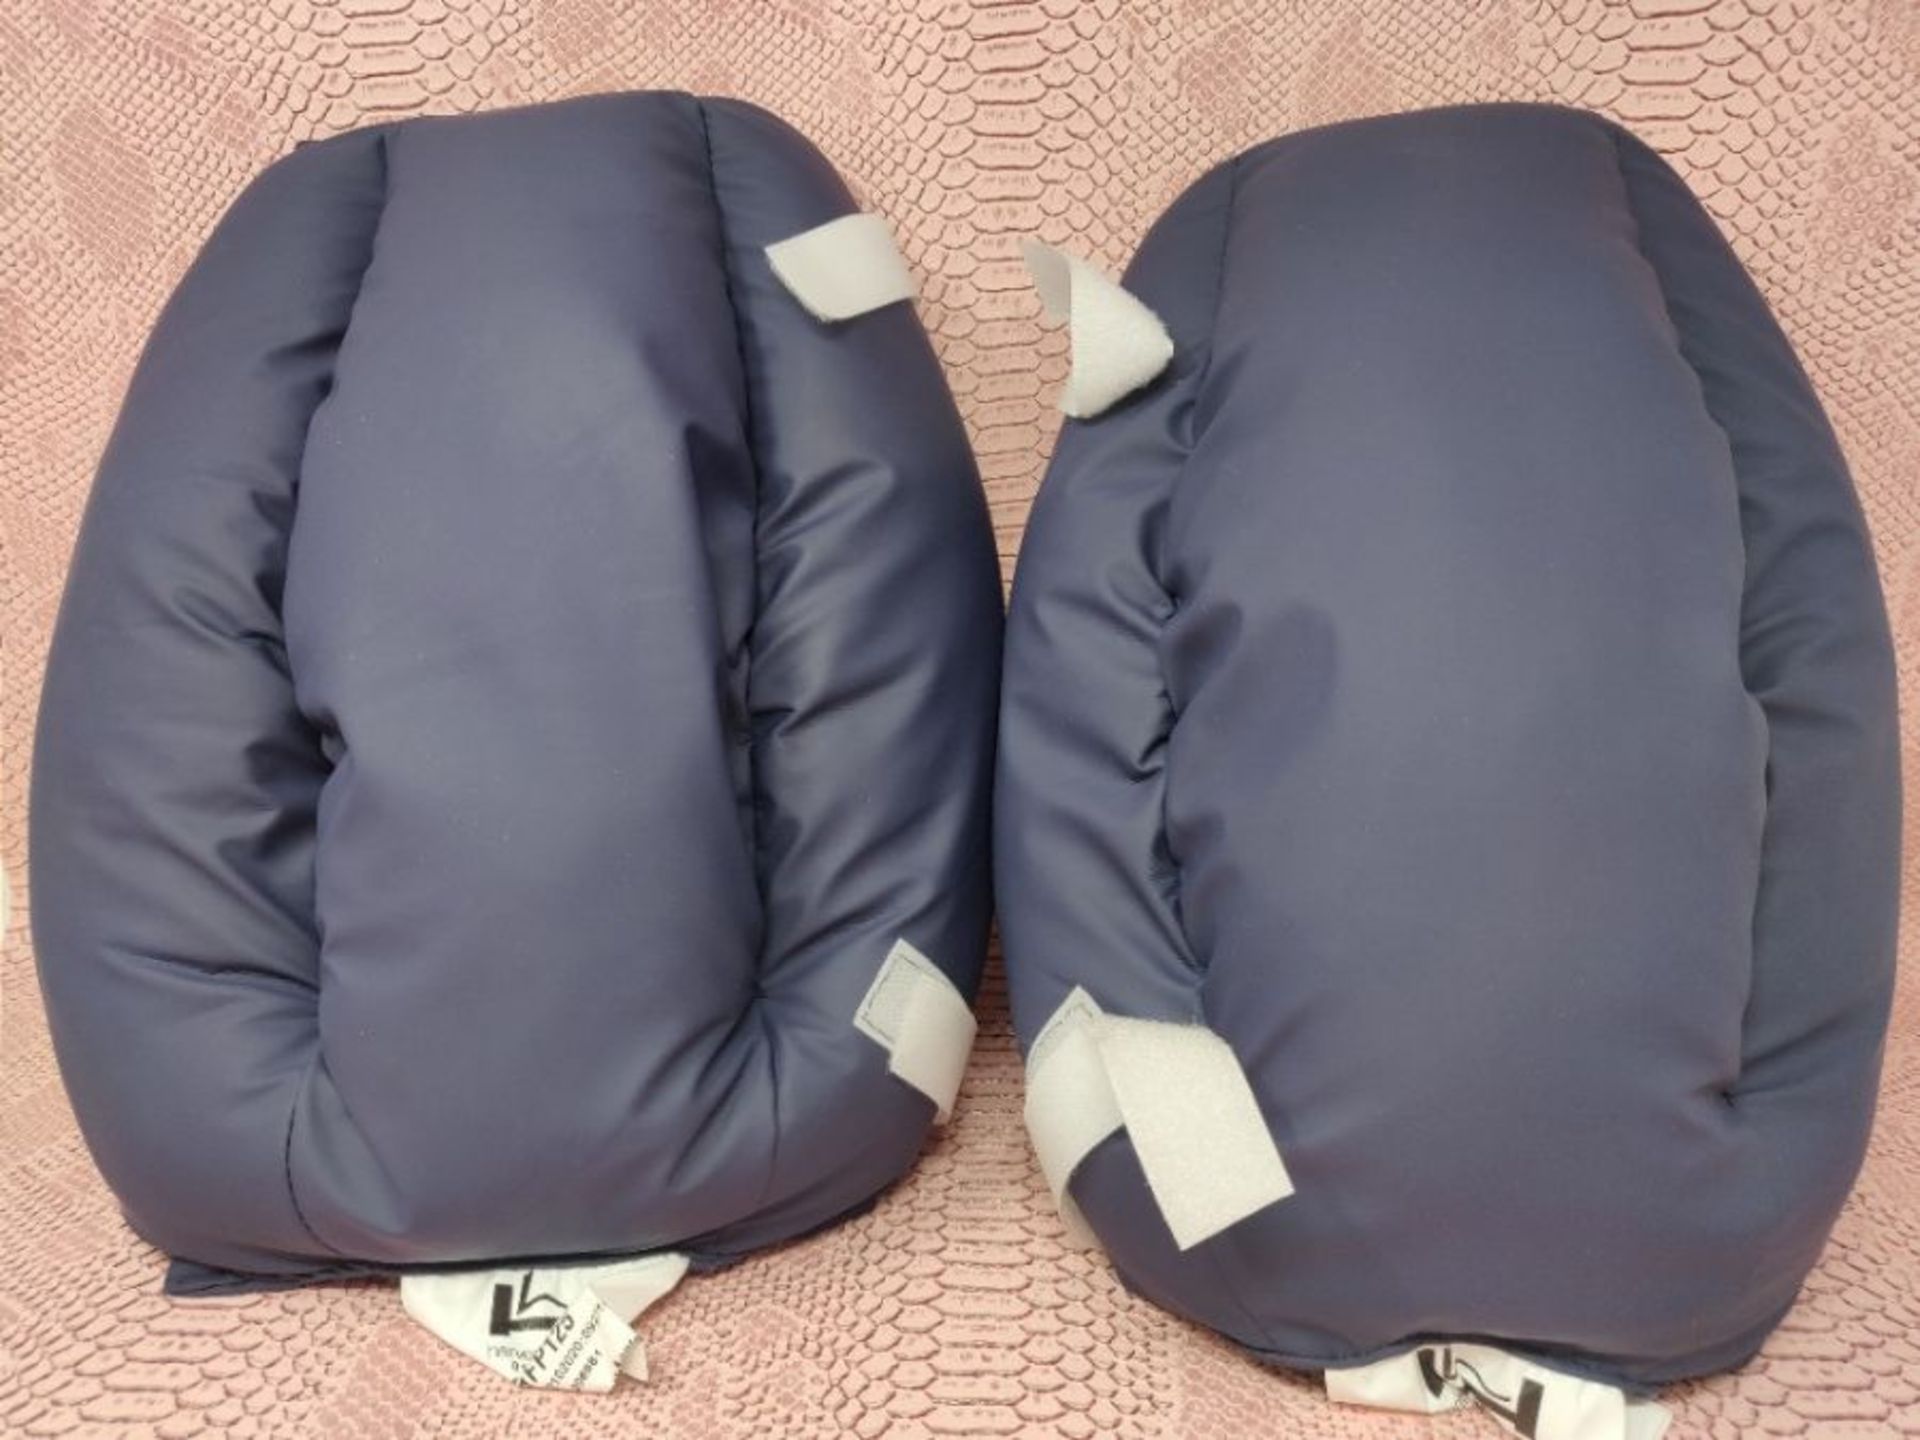 NRS Healthcare Pair of Elbow Pads for Pressure Care - Image 2 of 2